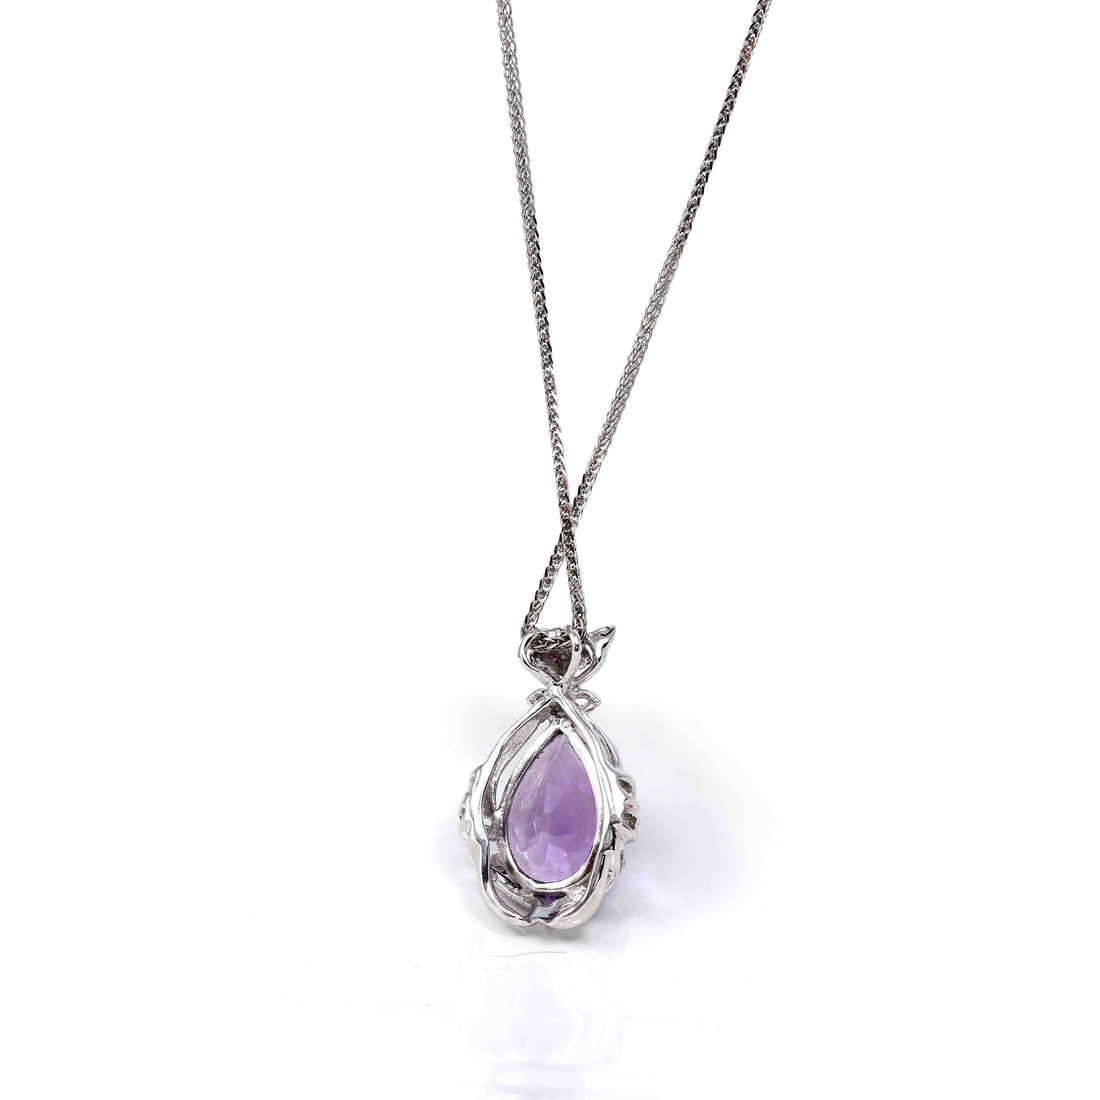 Baikalla Jewelry Silver Topaz Necklace Sterling Silver Natural Amethyst Luxury Pendant Fox Style Necklace With CZ